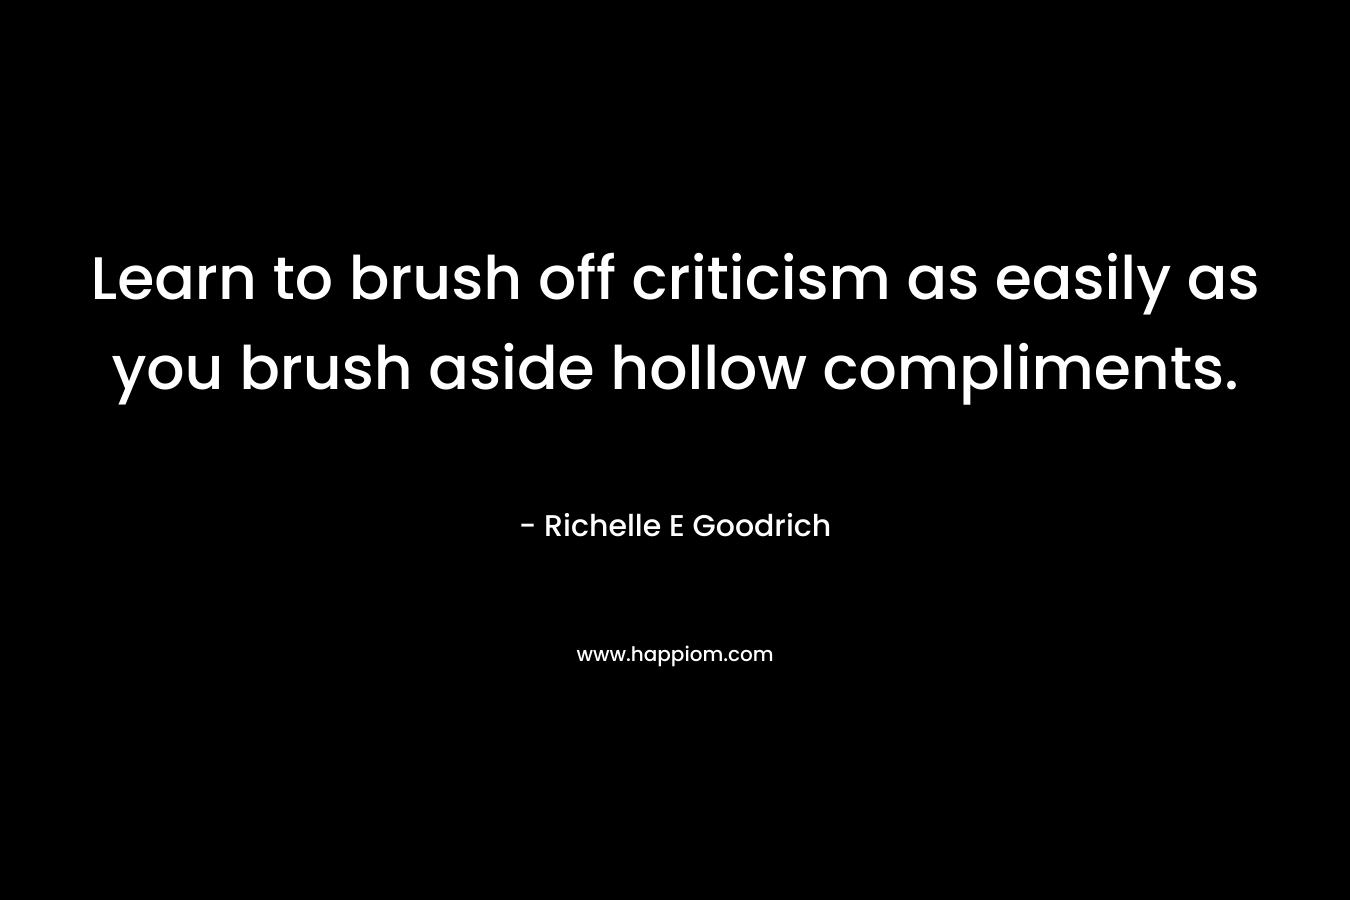 Learn to brush off criticism as easily as you brush aside hollow compliments. – Richelle E Goodrich